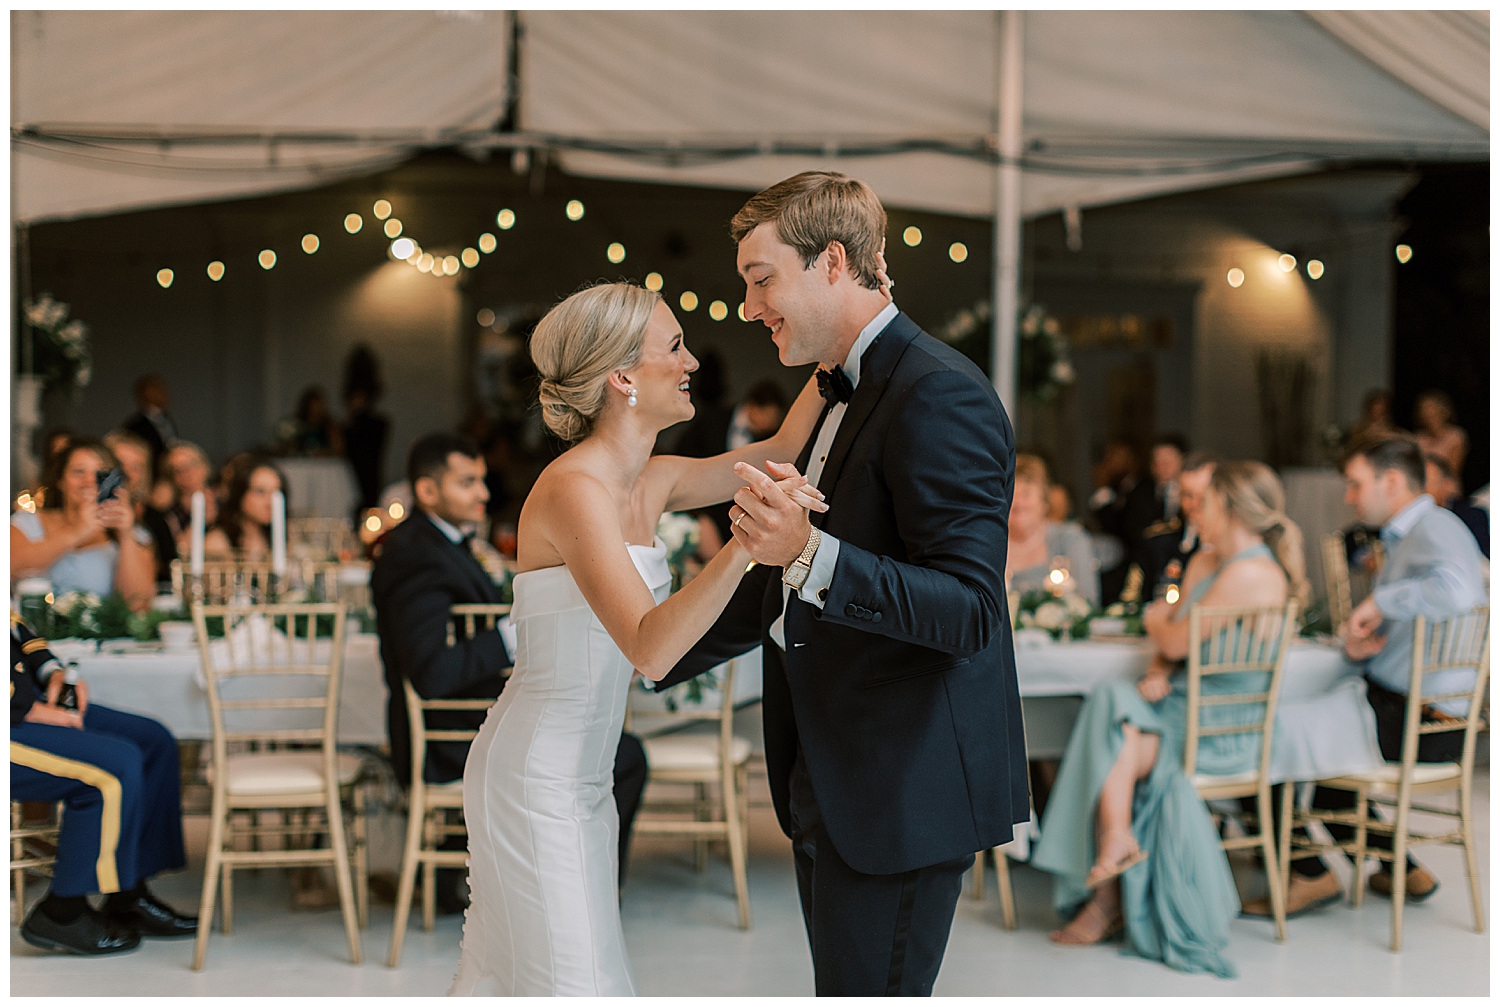 A couple shares their first dance as husband and wife.